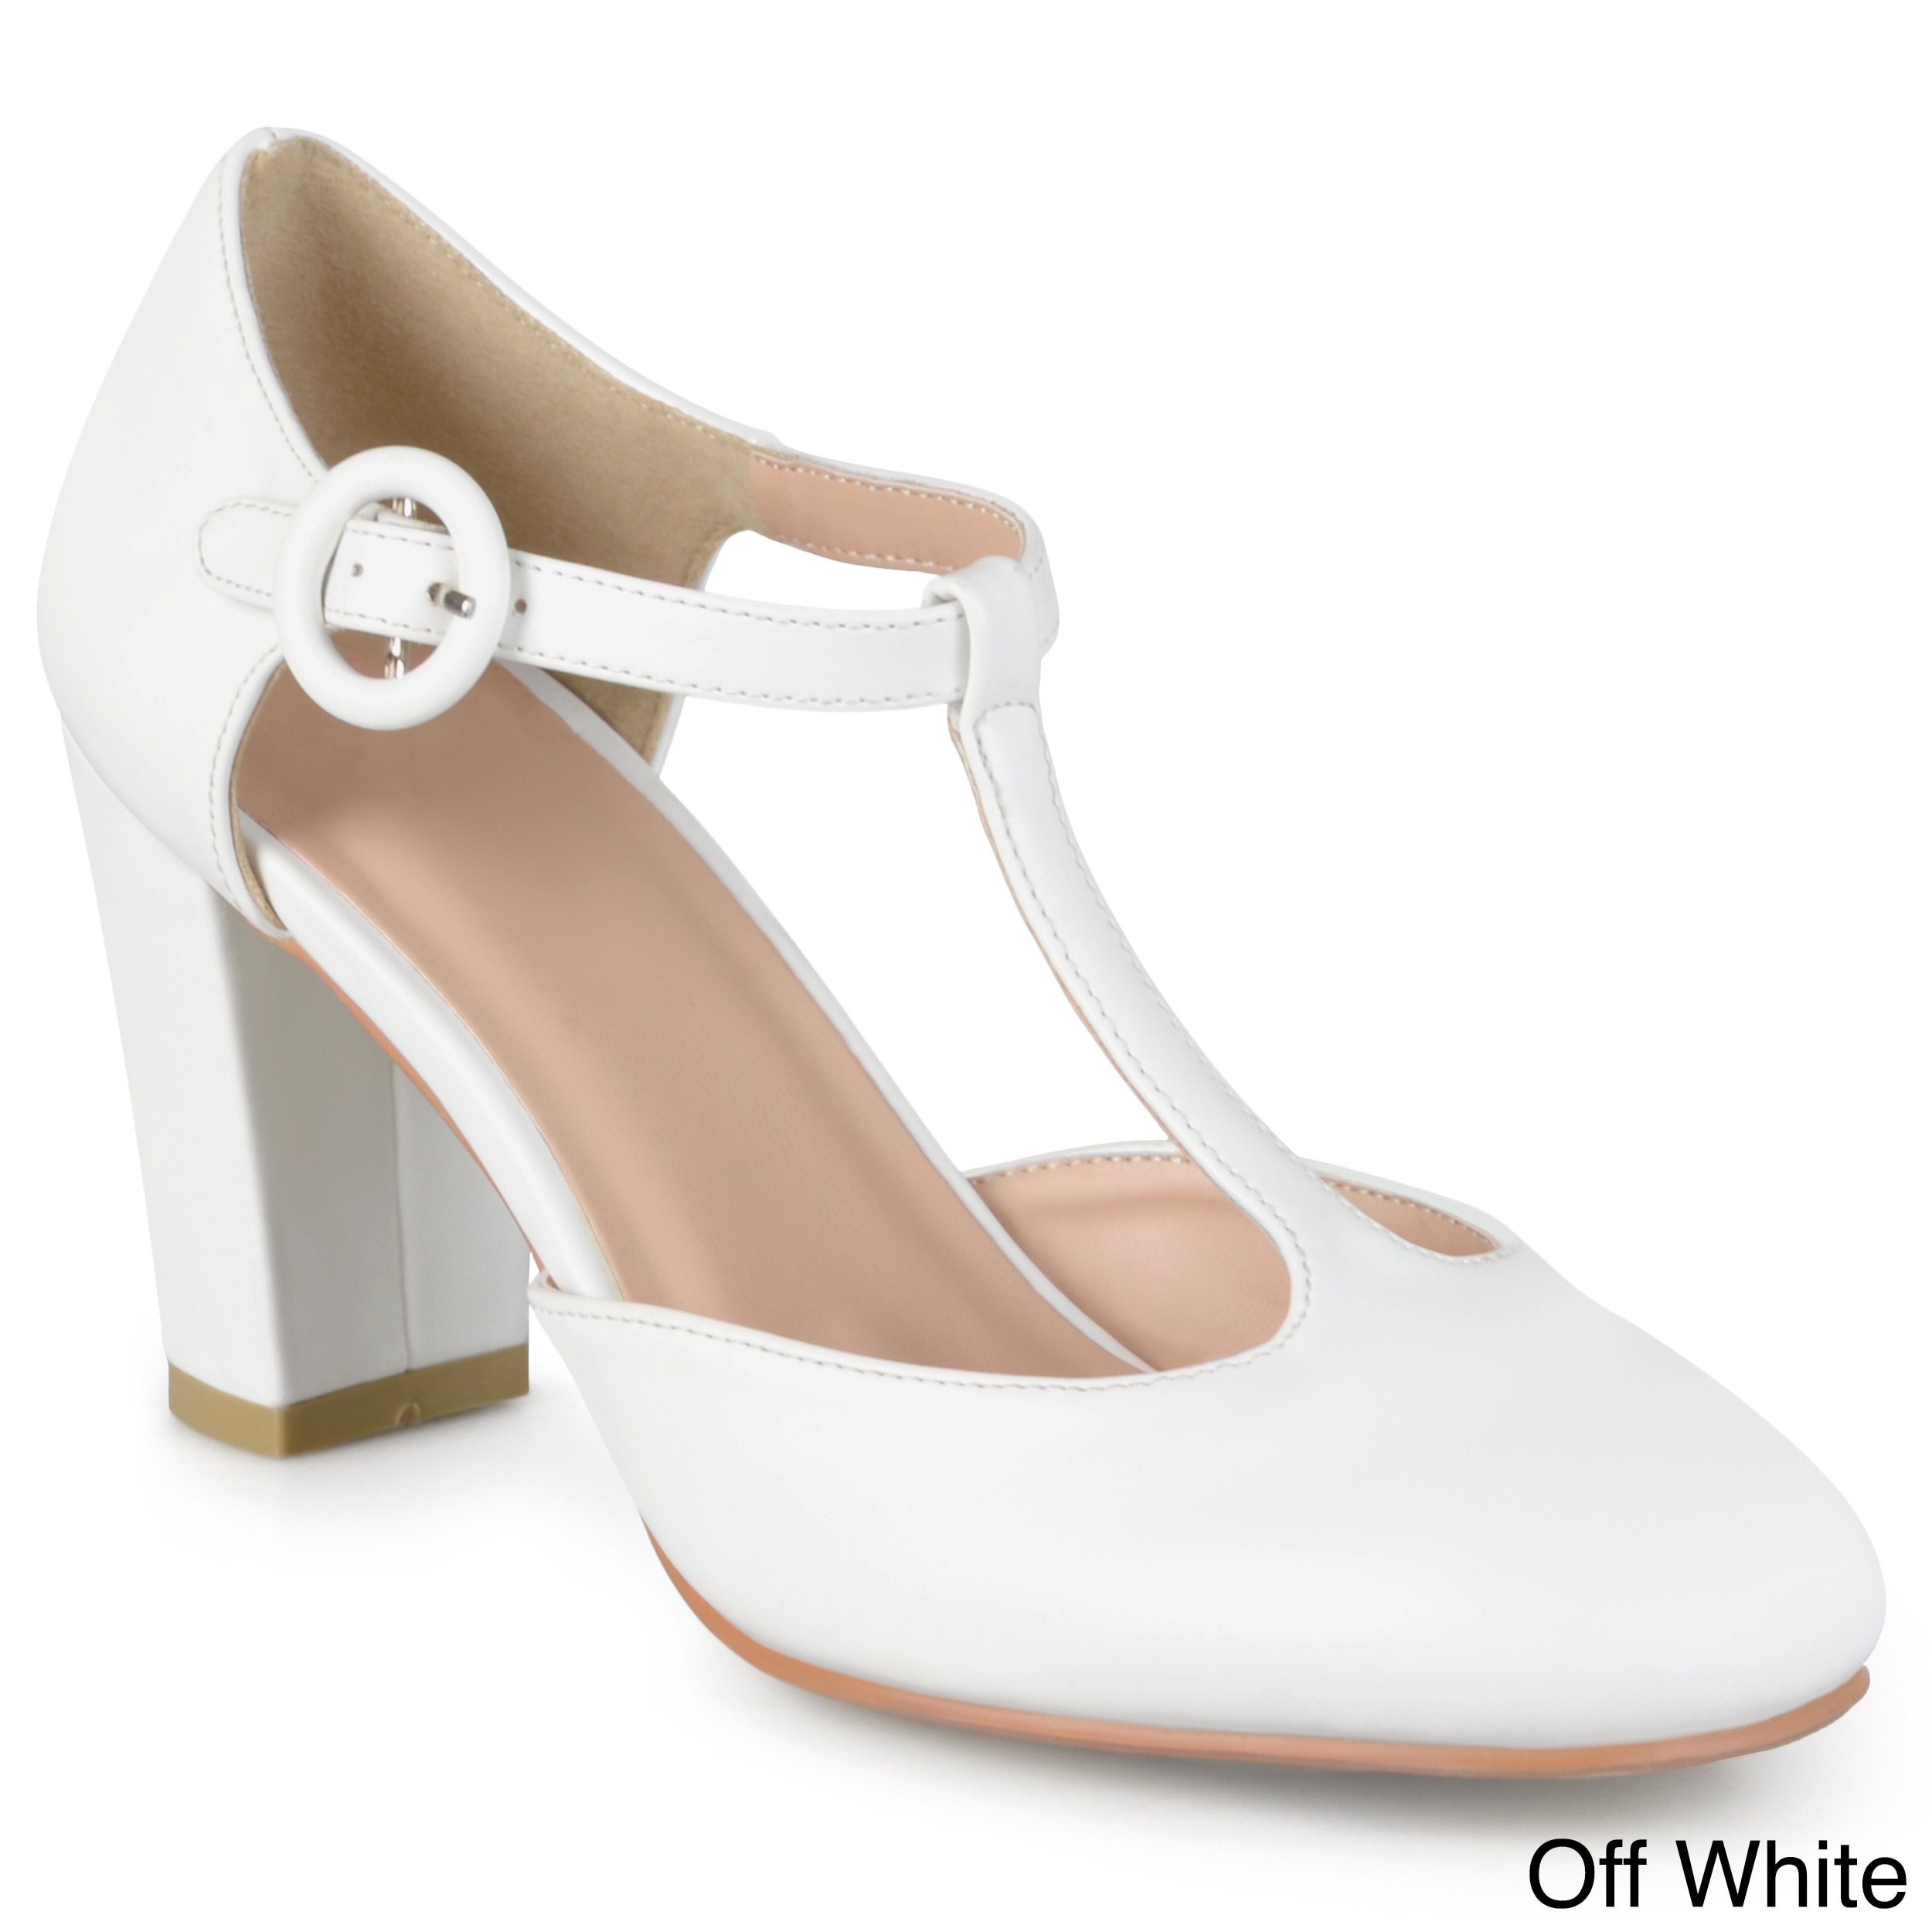 white pumps with strap